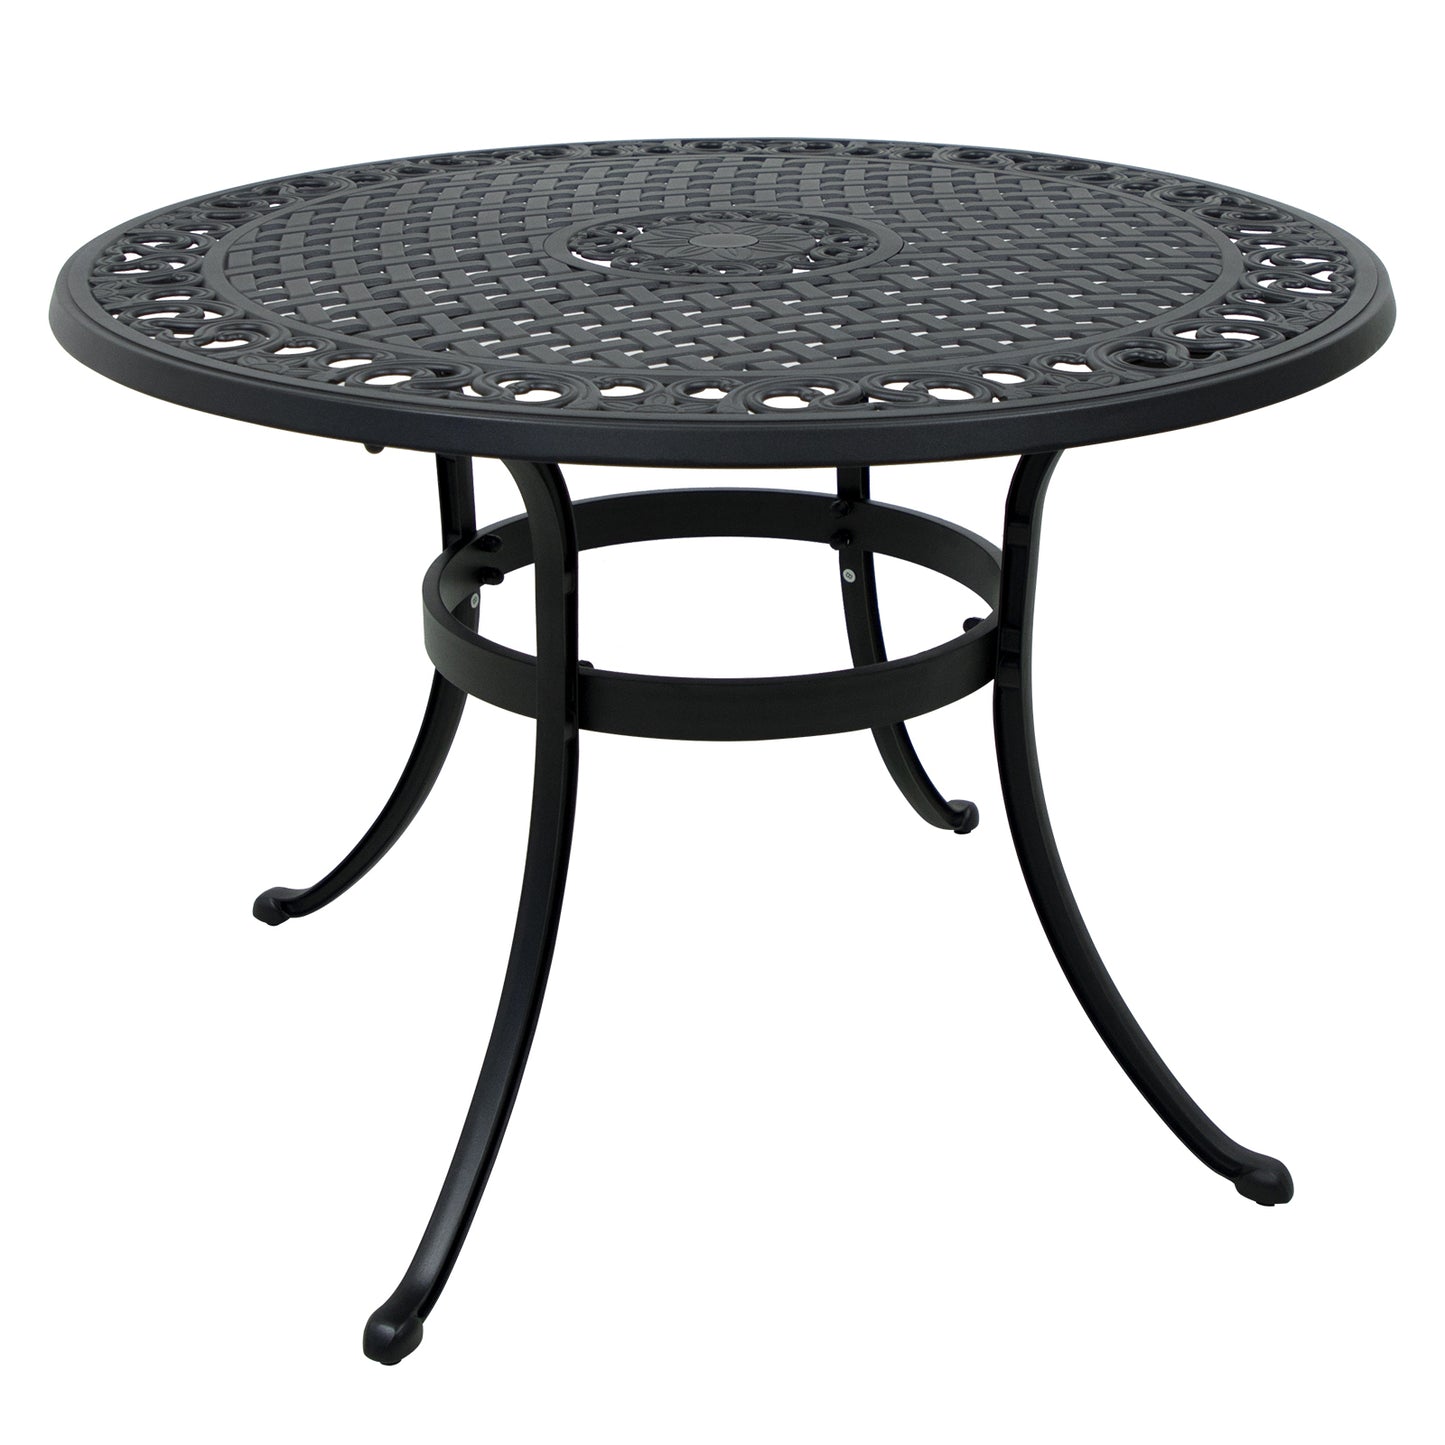 42 Inch Cast Aluminum Patio Table with Umbrella Hole,Round Patio Bistro Table for Garden, Patio, Yard, Black with Antique Bronze at The Edge